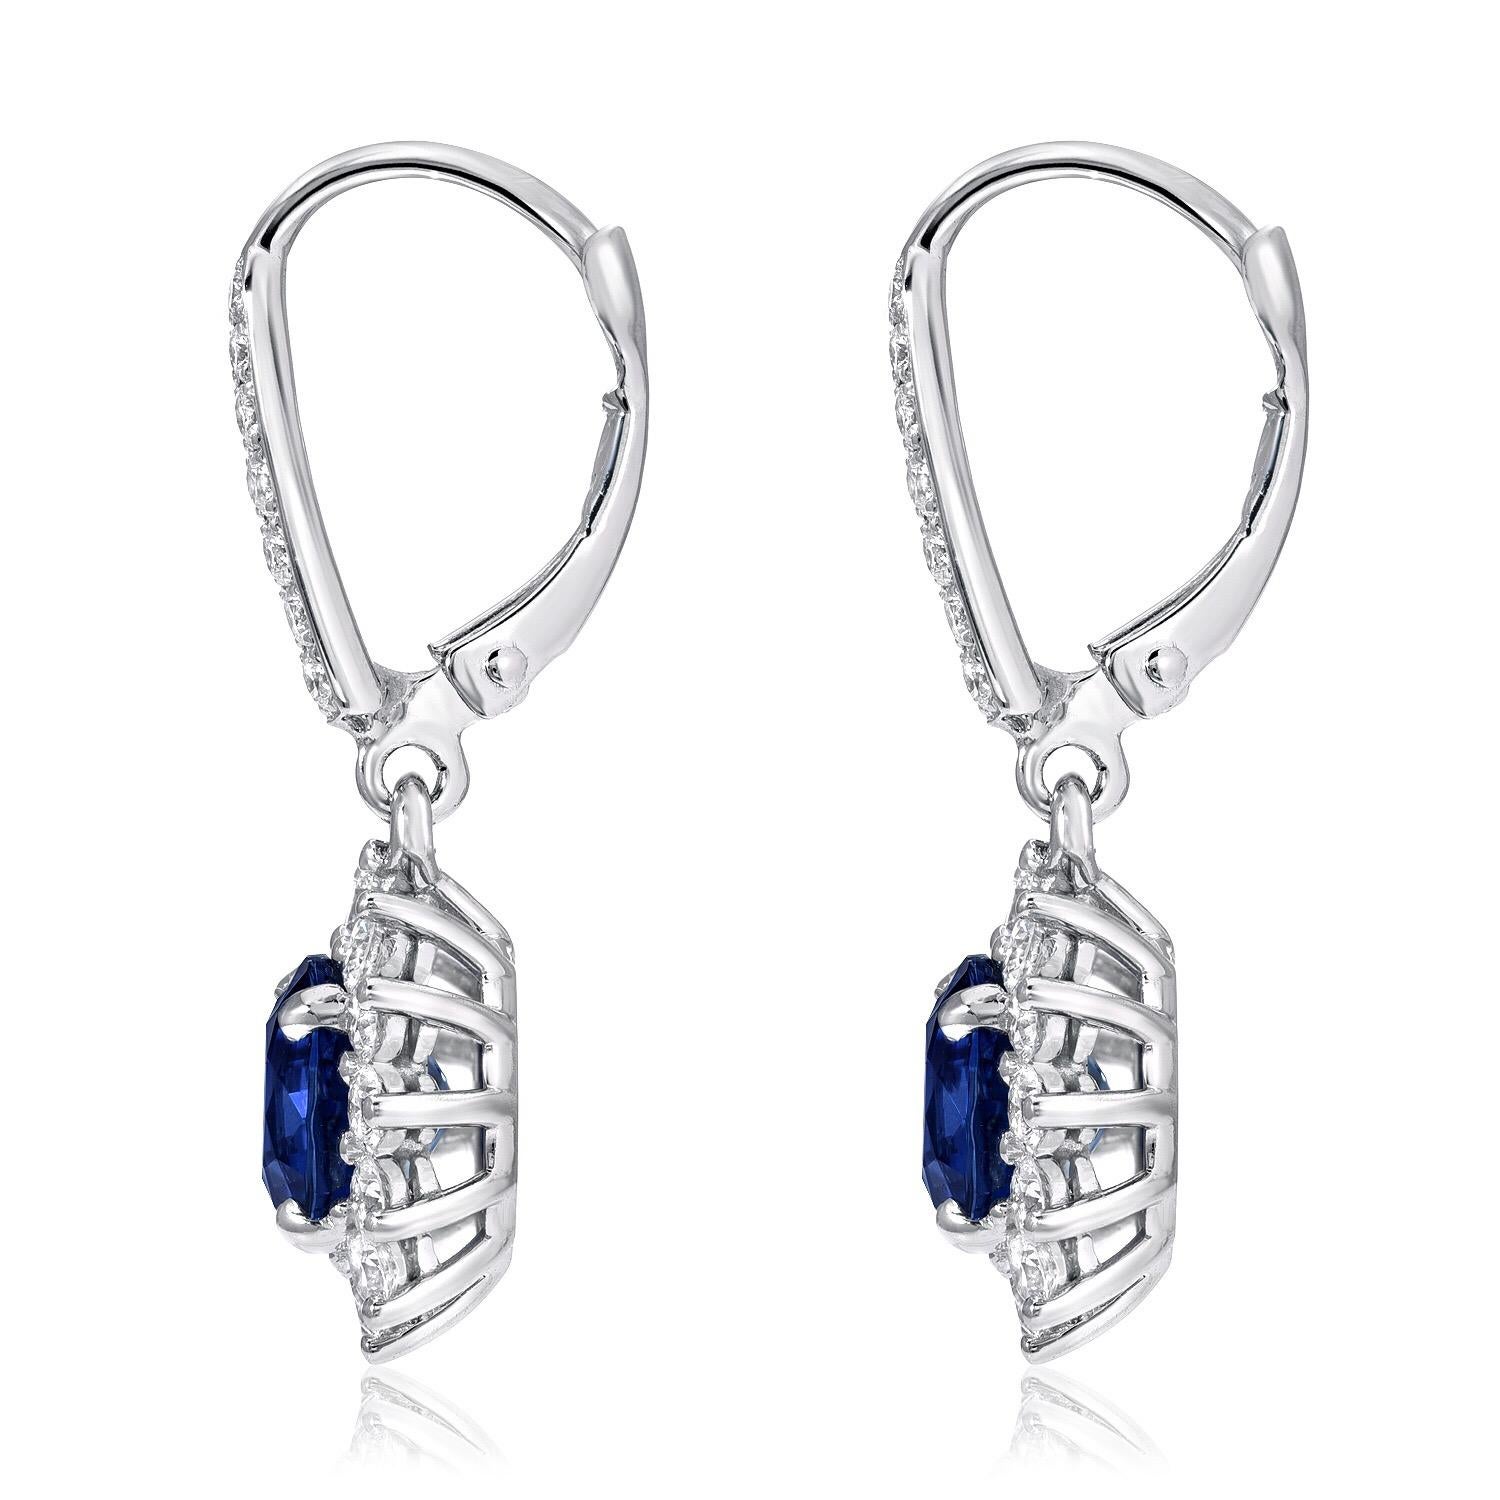 Sapphire earrings featuring a pair of round Blue Sapphires weighing a total of 3.47 carats, and adorned by a total of 1.26 carats of diamonds, in 18K white gold.
These lever back, drop Sapphire earrings are approximately 1 inch long.

Returns are